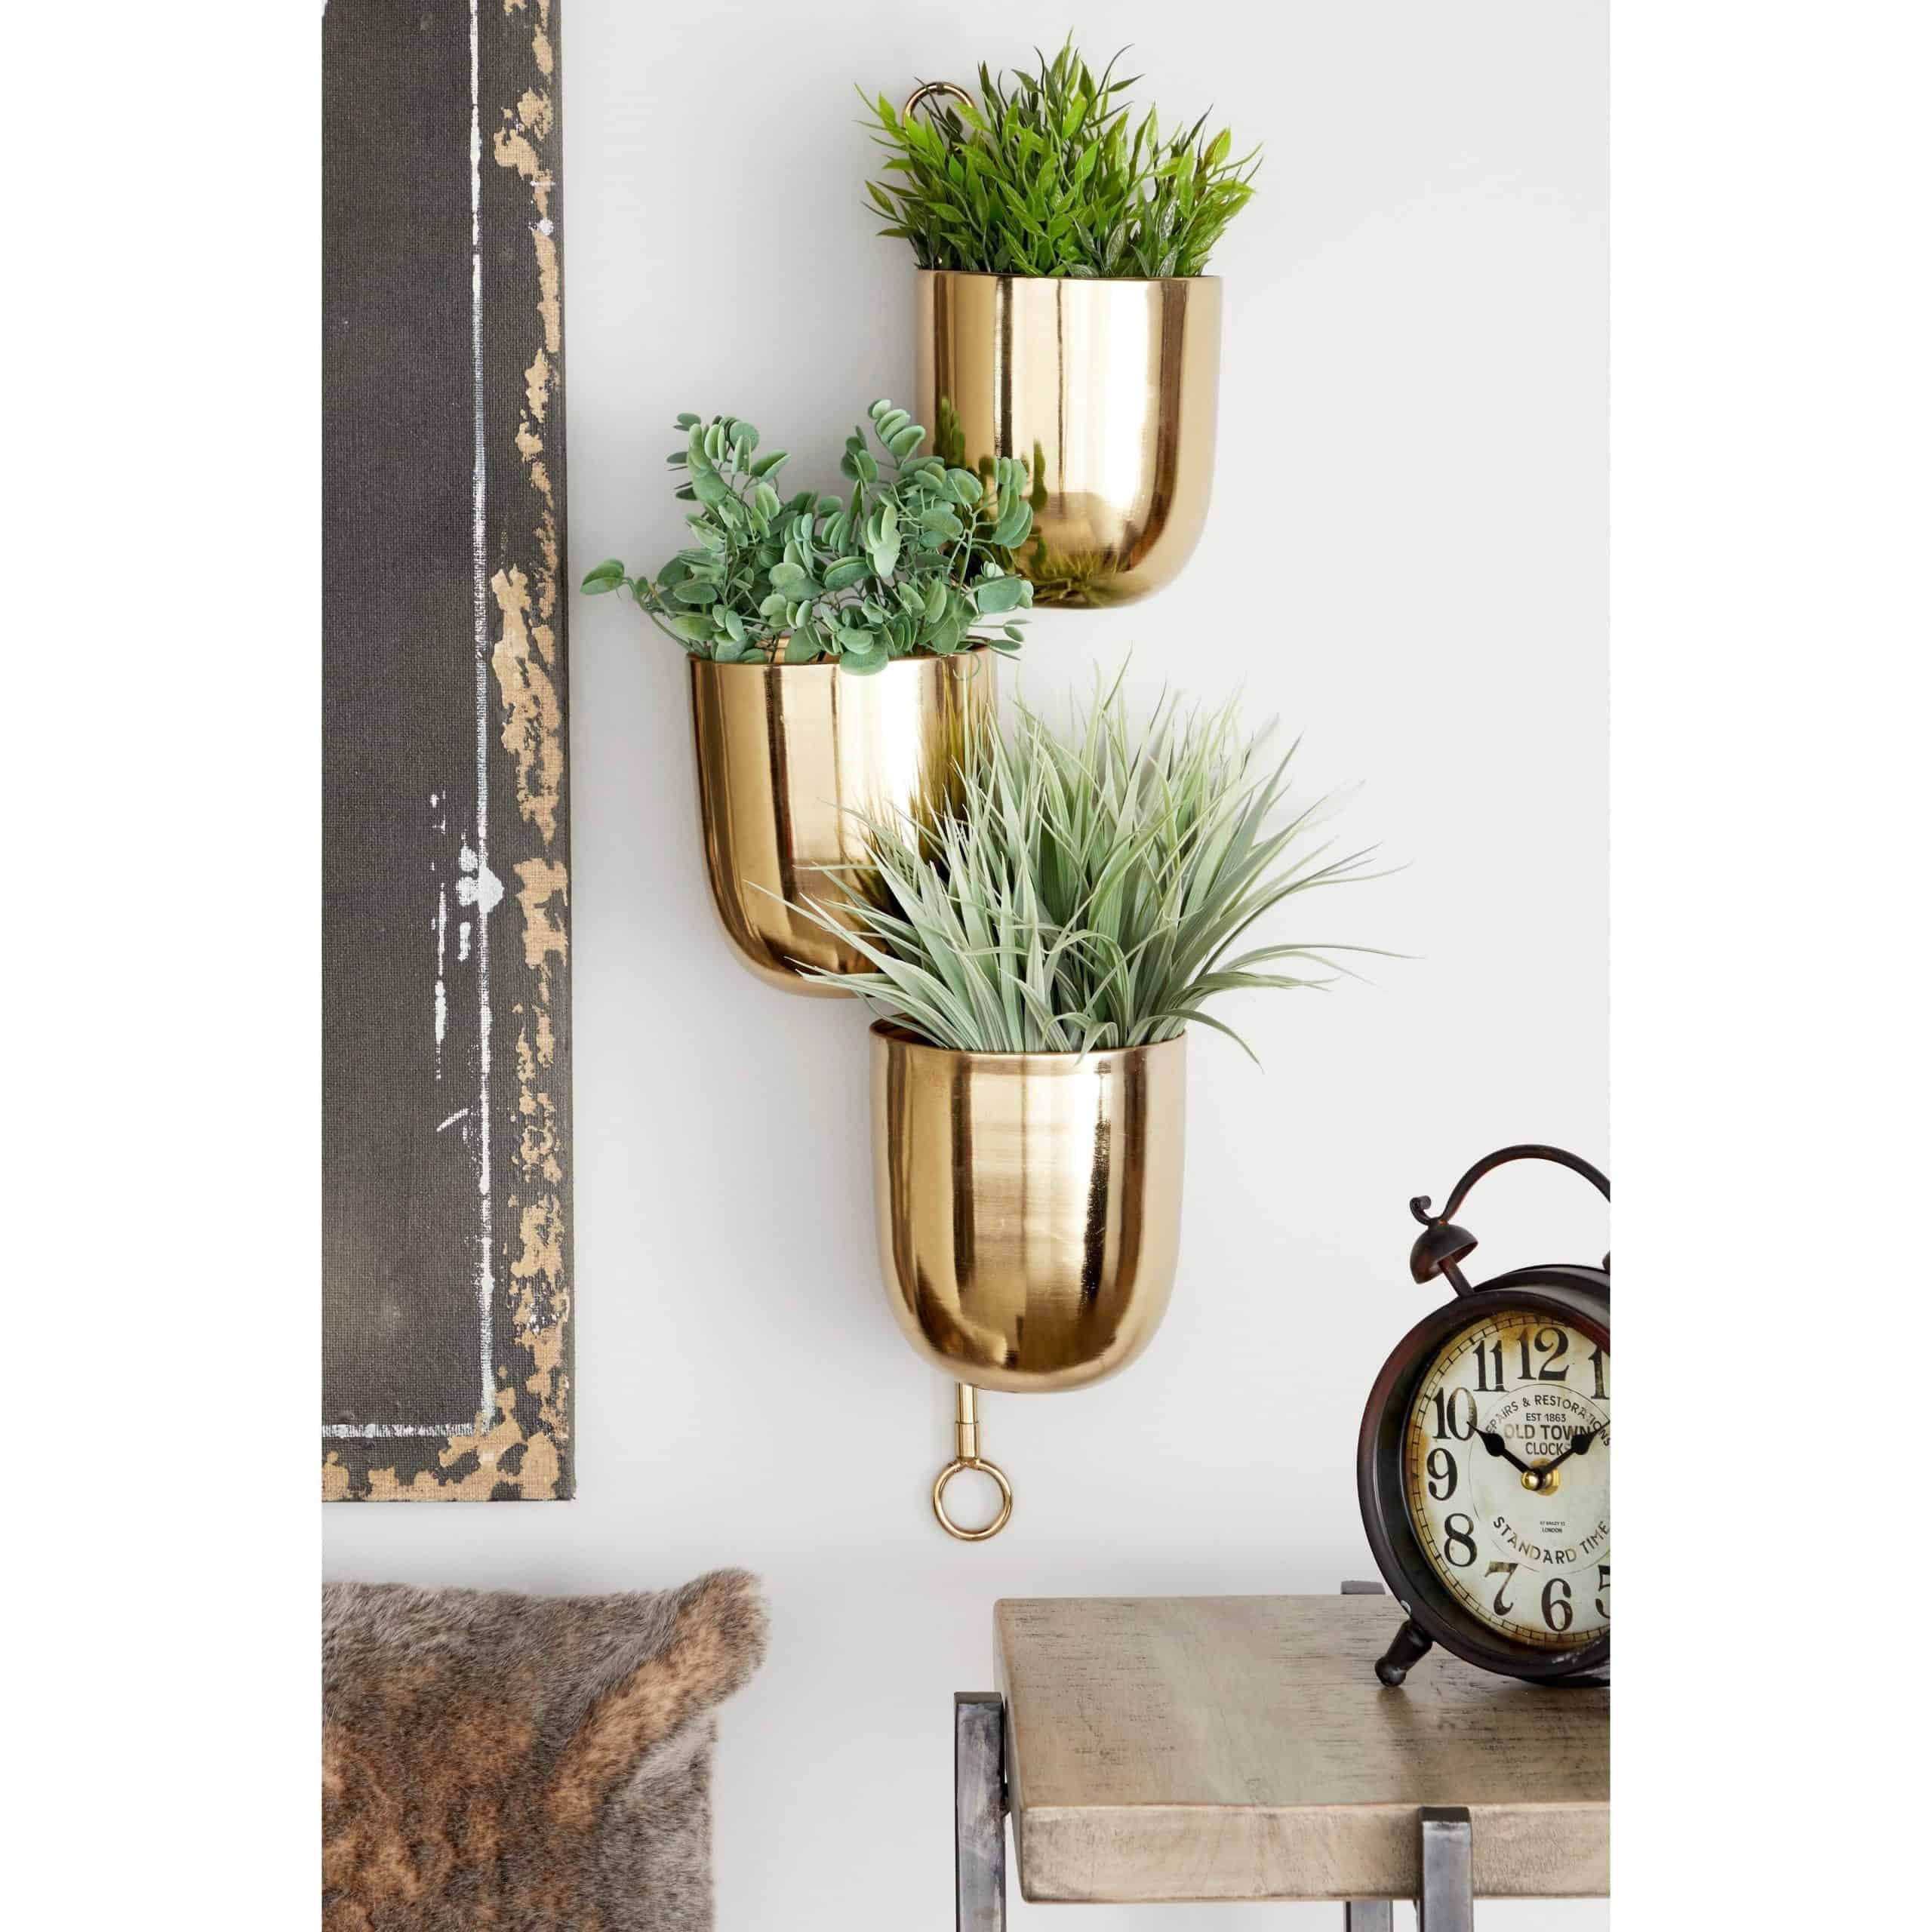 These Metallic Pot Planters Are a Great Contemporary Decor Piece